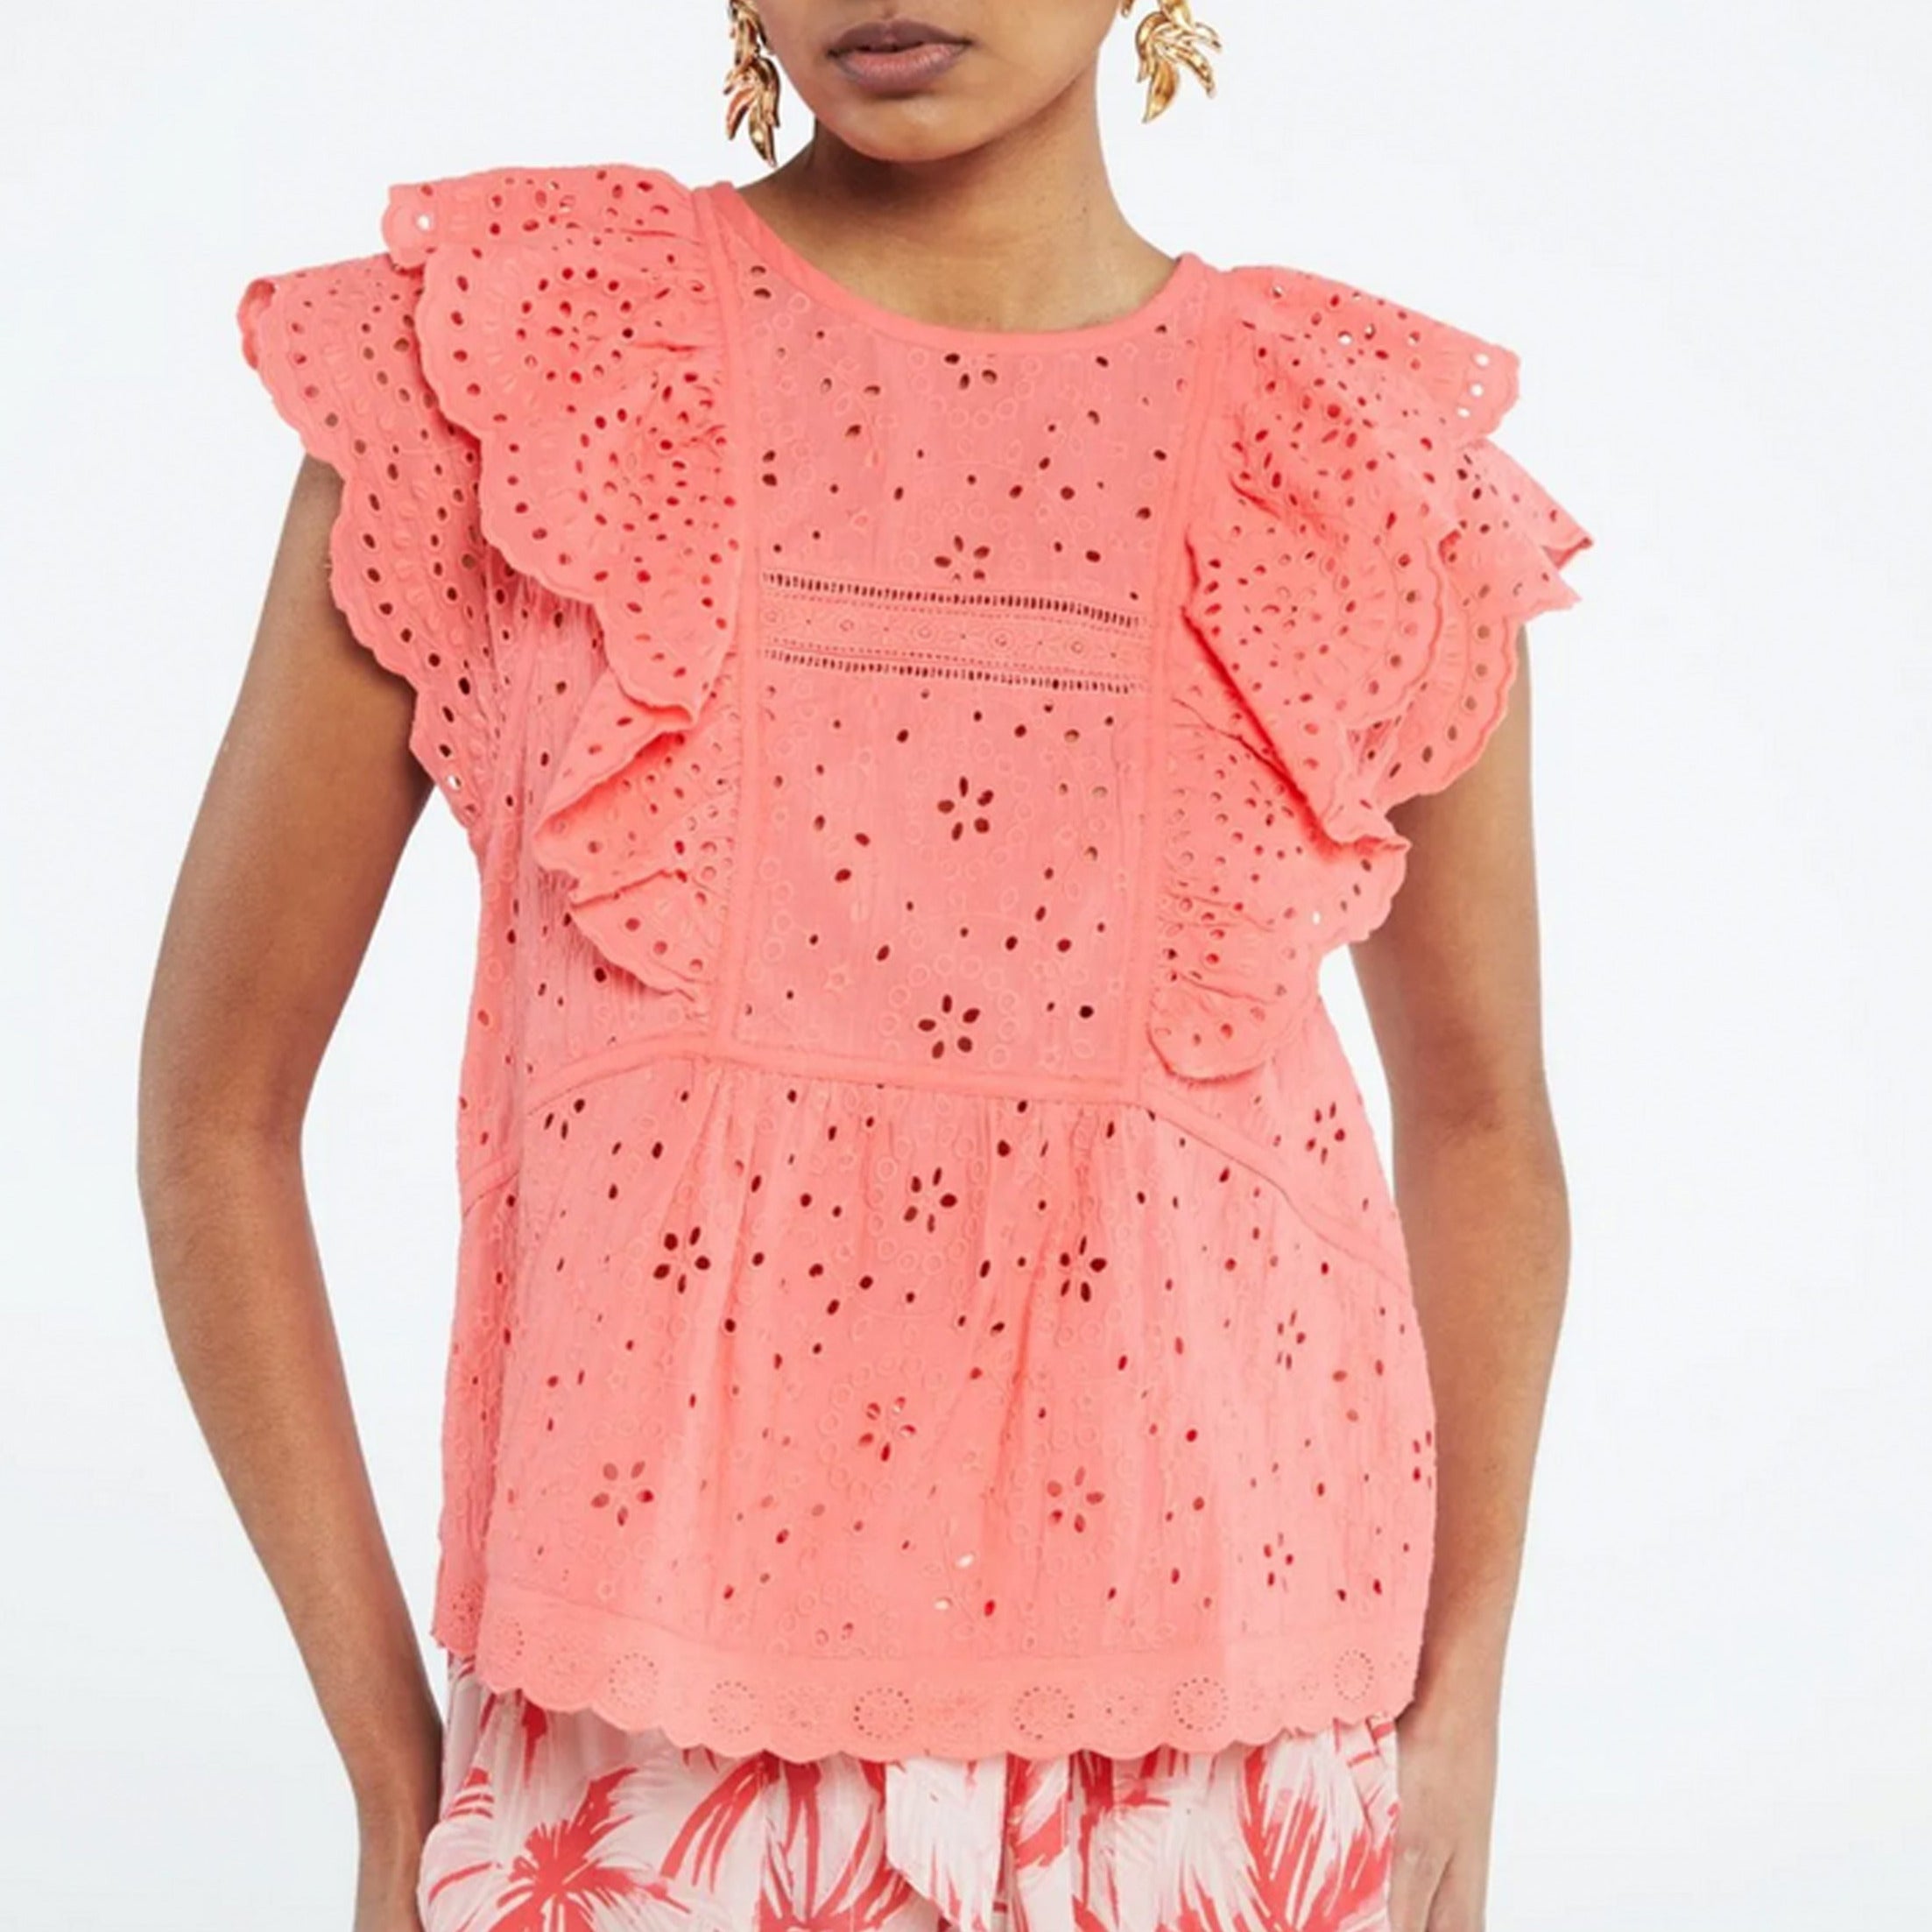 The model is wearing the Gigi Top - Pink Papaya, a regular fitting coral top made of organic cotton with ruffled ruffles by Fabienne Chapot.